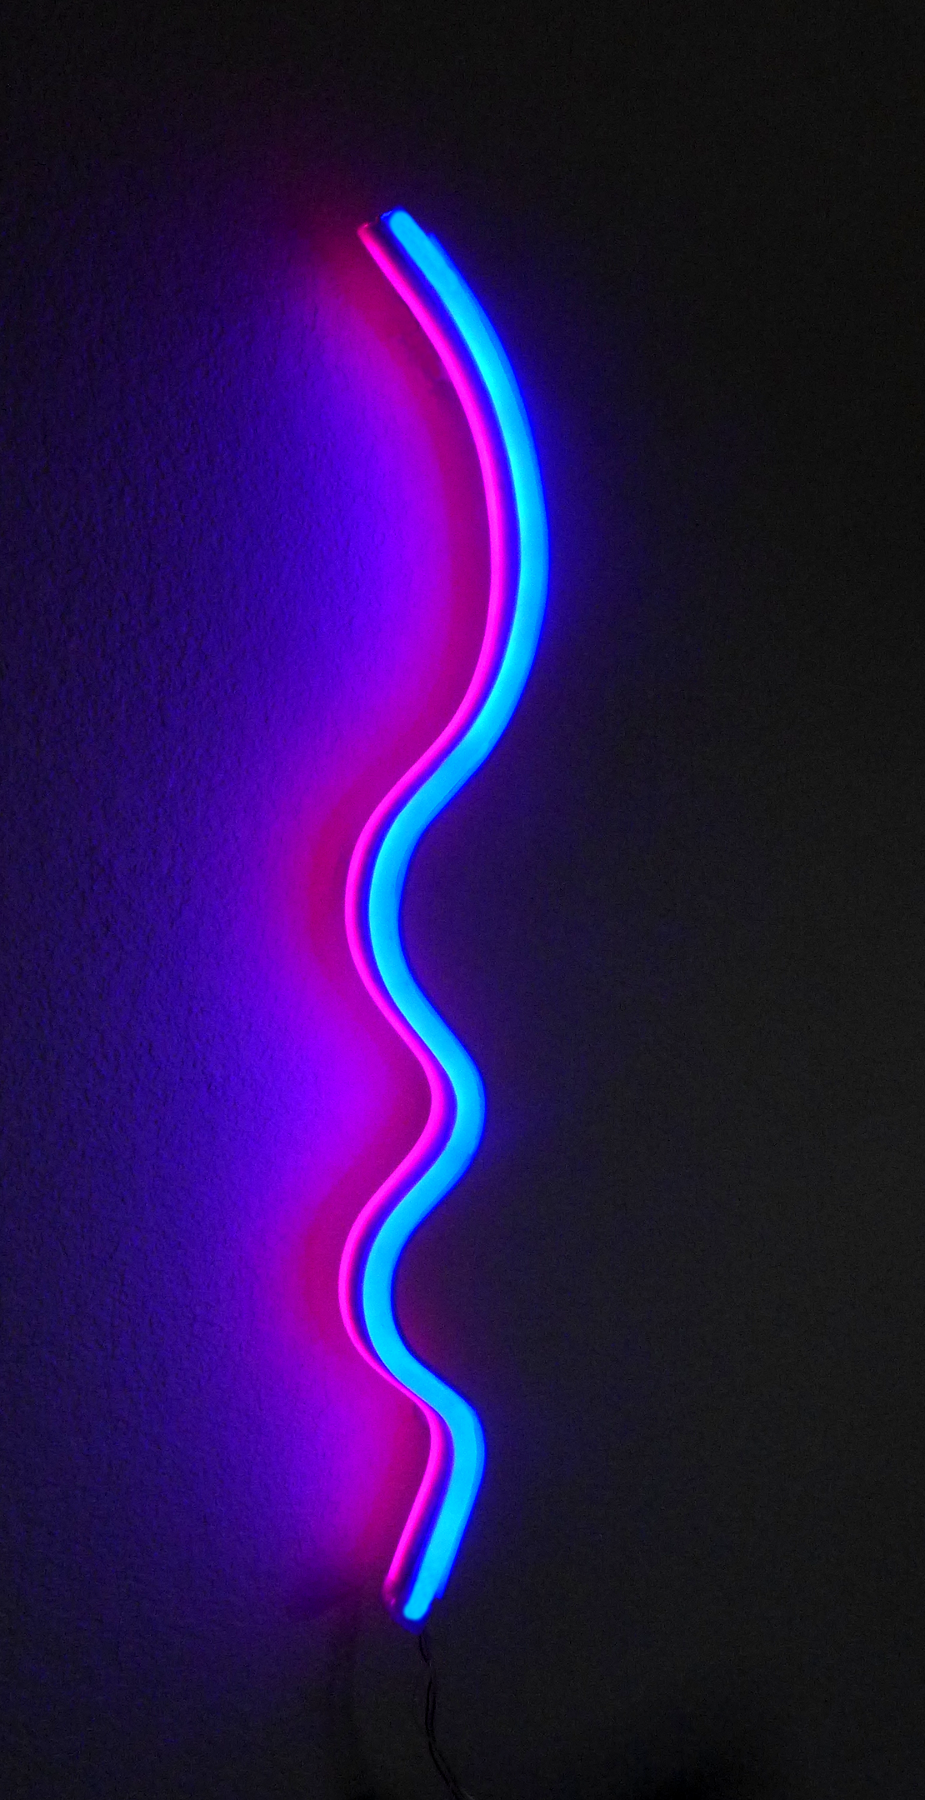 UltraViolet Steel And LED Indoor Outdoor Wall Art Garden Art. Etsy. Led Wall Art, Blue Aesthetic, Neon Aesthetic